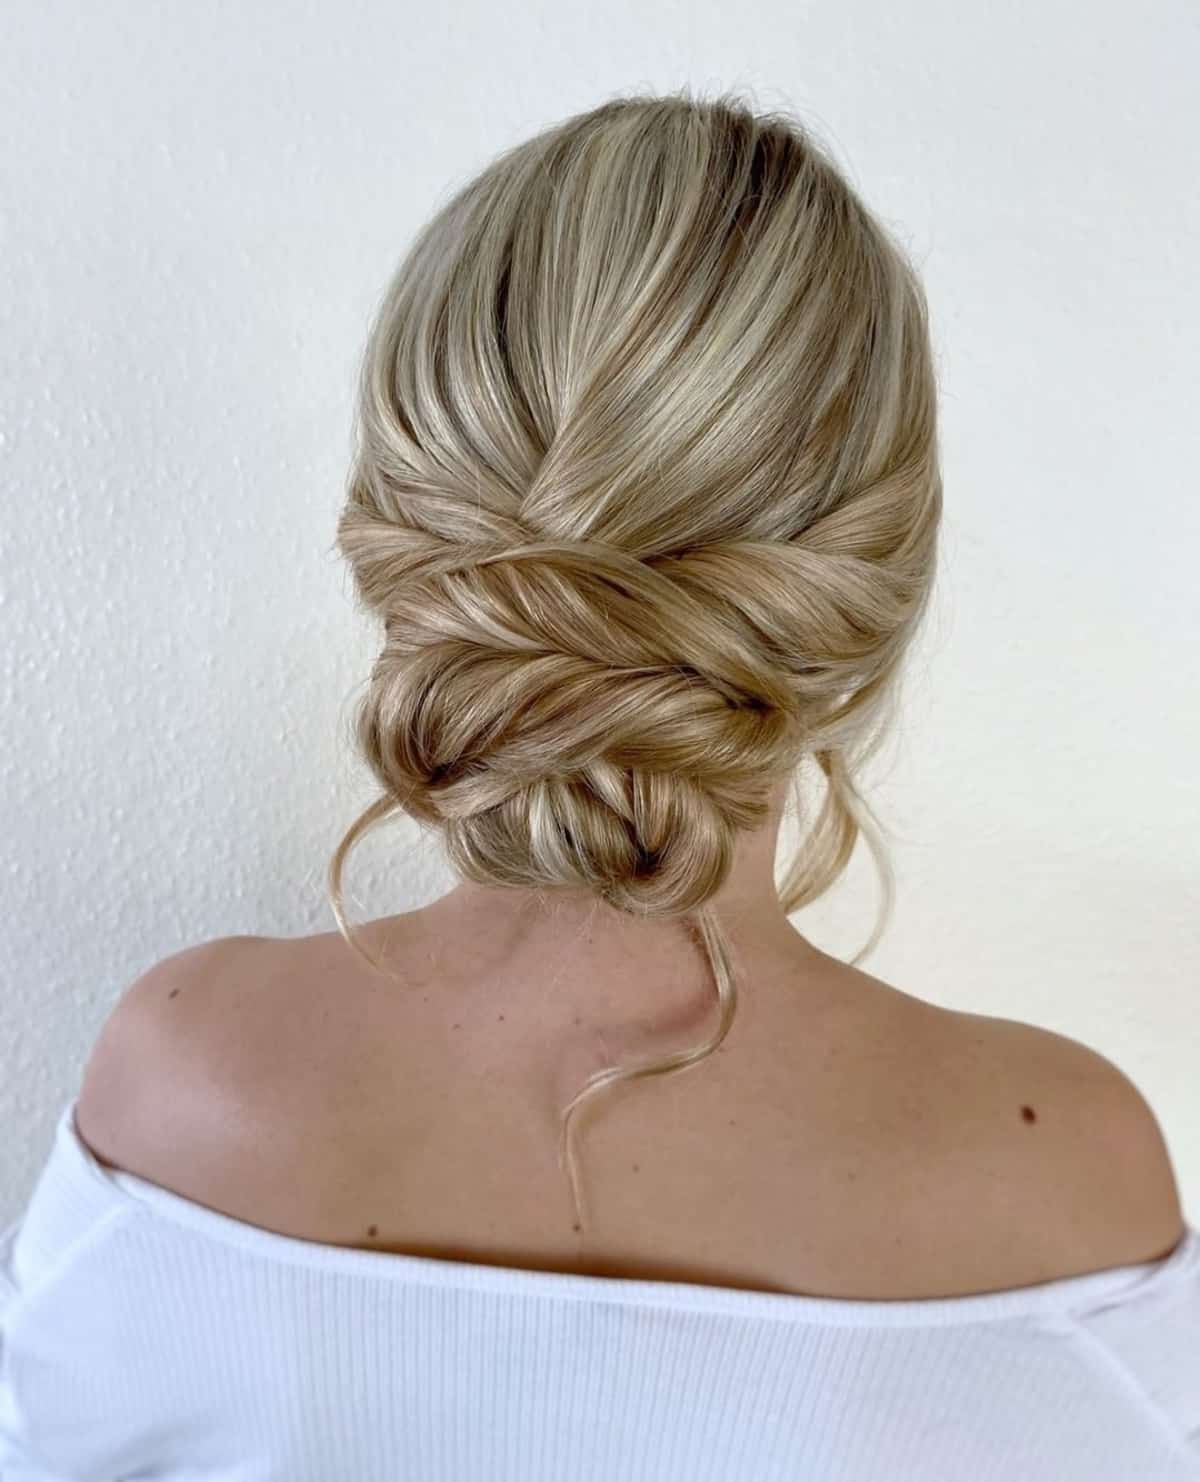 35 Gorgeous Bridesmaid Hairstyles For The Brides Big Day Regarding Most Popular Bridesmaid’s Updo For Long Hair (View 14 of 15)